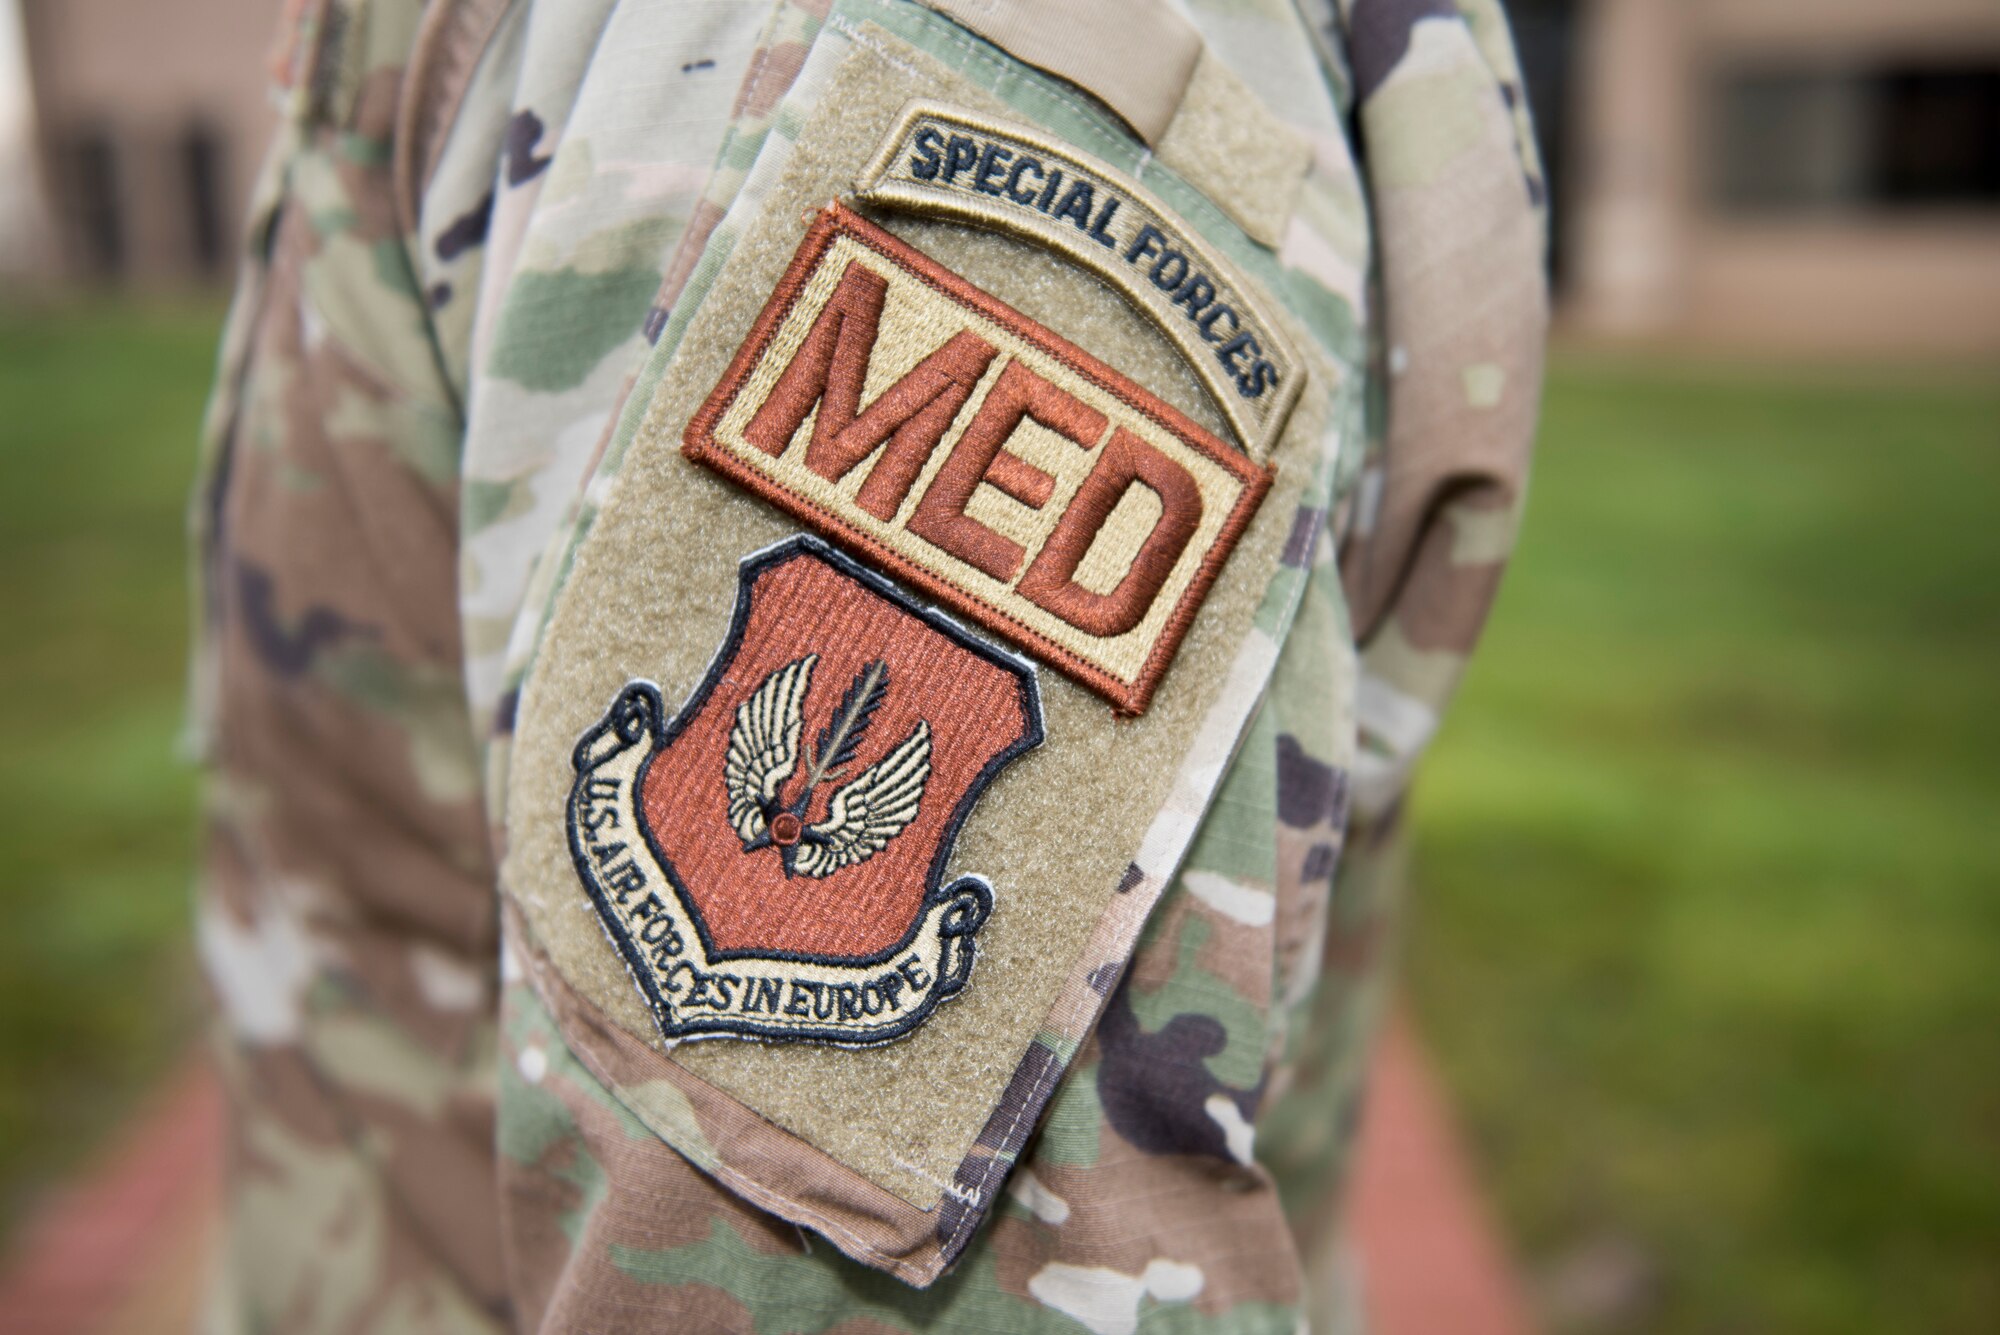 U.S. Air Force Lt. Col. Robert Heil, 422nd Medical Squadron commander, displays his military patches at the 423rd MDS clinic at RAF Alconbury, England, December 18, 2019. Heil spent 12 years in the Army as a Special Forces medic and now serves as an Air Force medical squadron commander in the 501st Combat Support Wing. (U.S. Air Force photo by Airman 1st Class Jennifer Zima)